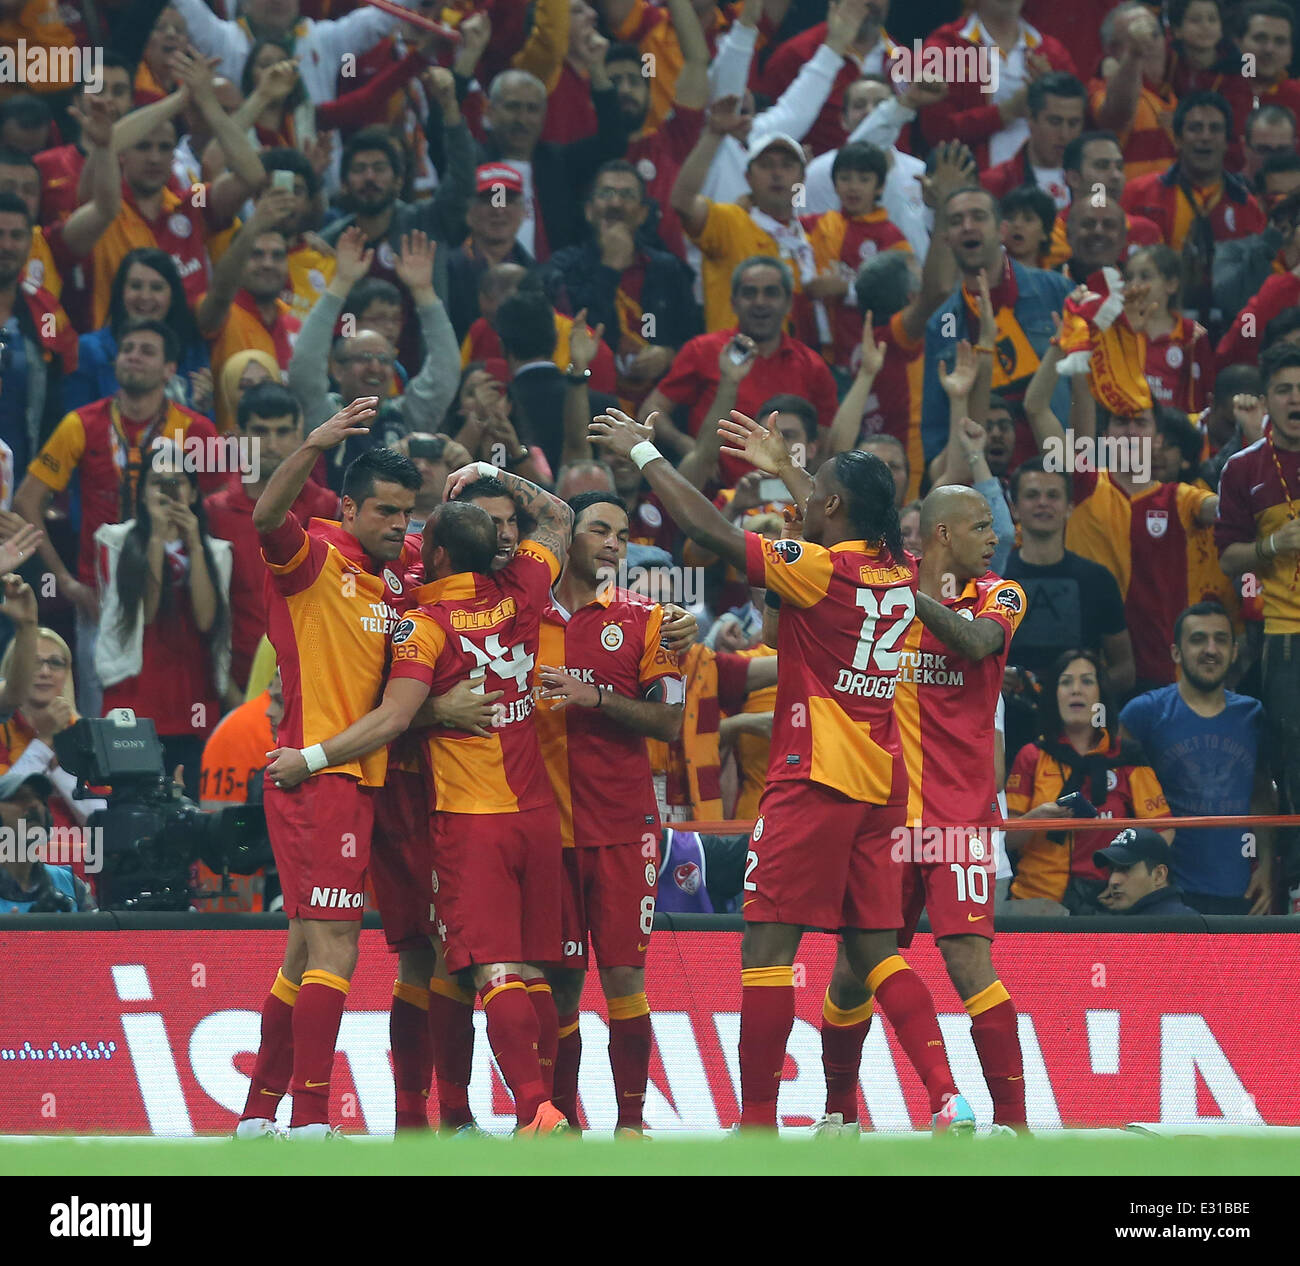 Galatasaray Football club win their 19th Spor Toto Super League title after victory over Sivasspor at Turk Telekom Arena Stadium in Istanbul Match Score: Galatasaray 4 - Sivasspor 2  Featuring: Atmosphere Where: Istanbul, Turkey When: 05 May 2013 Stock Photo